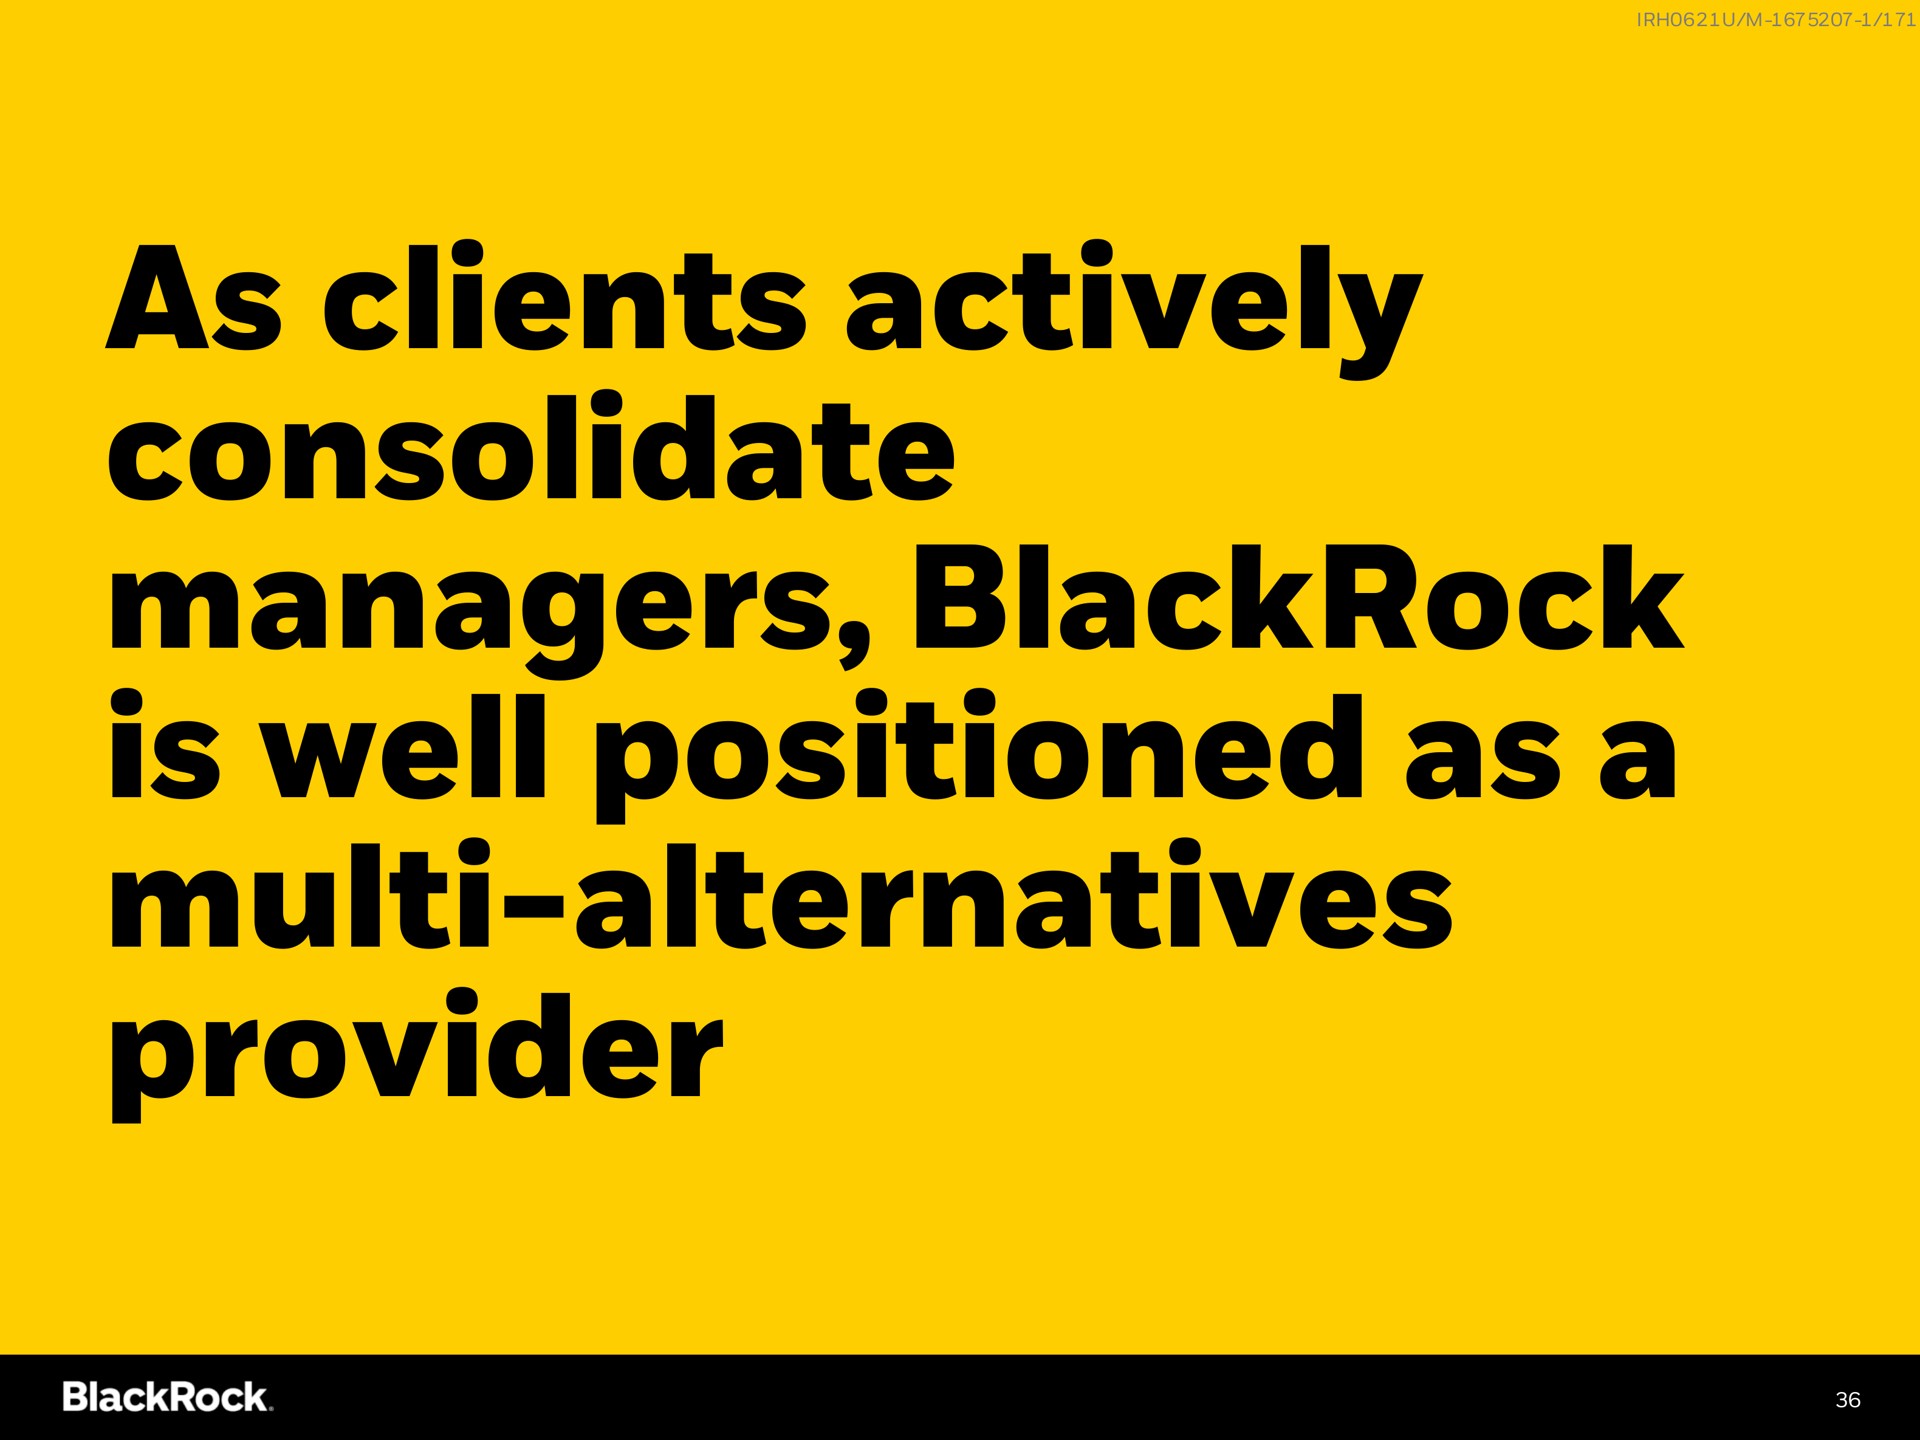 as clients actively consolidate managers is well positioned as a alternatives provider | BlackRock